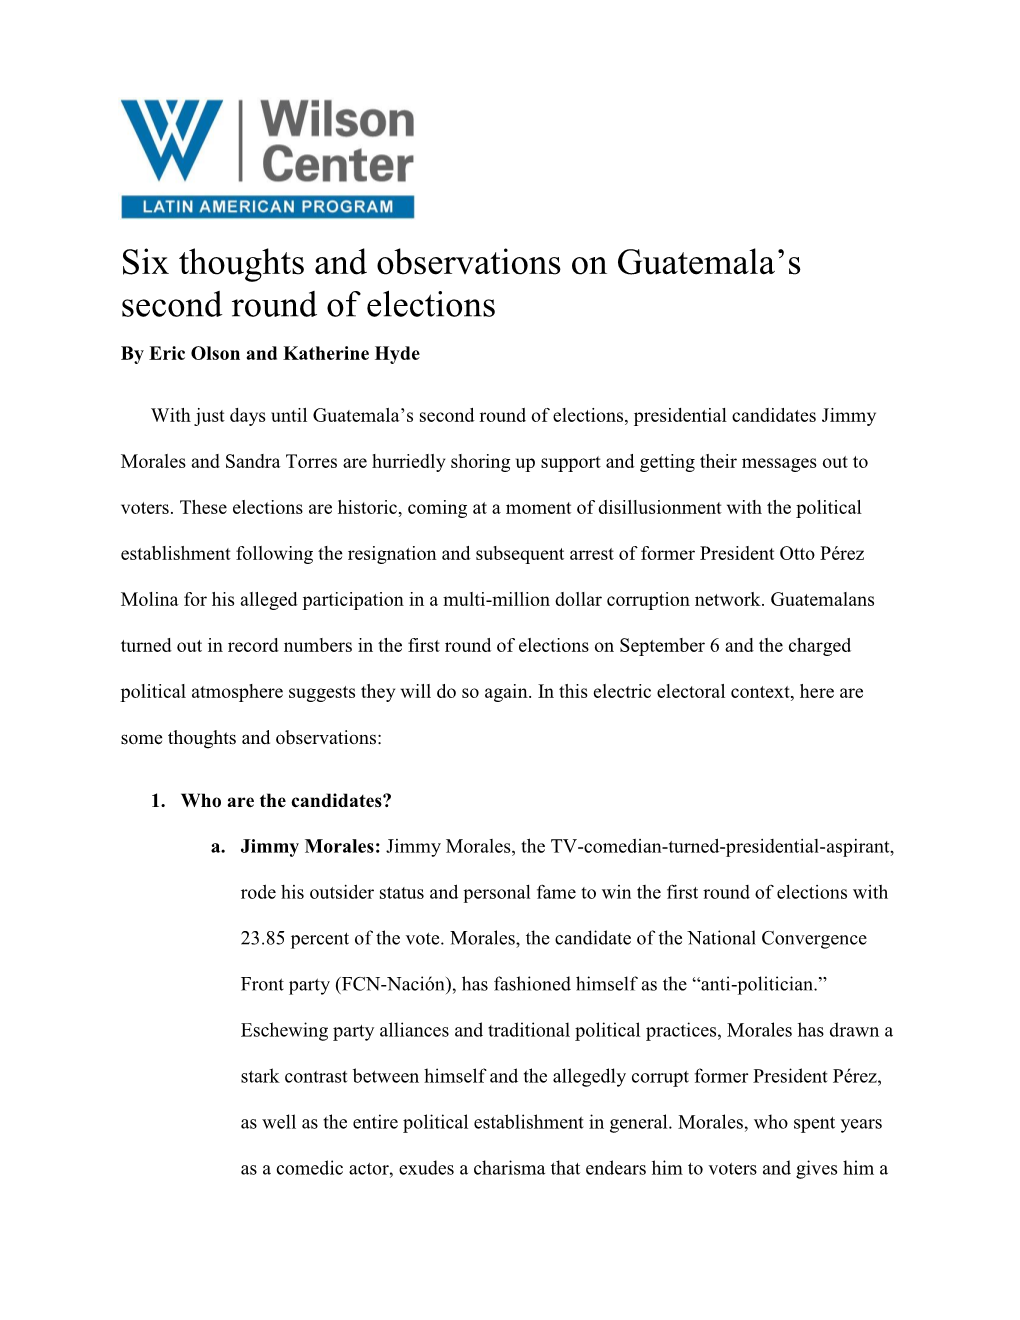 Six Thoughts and Observations on Guatemala's Second Round Of